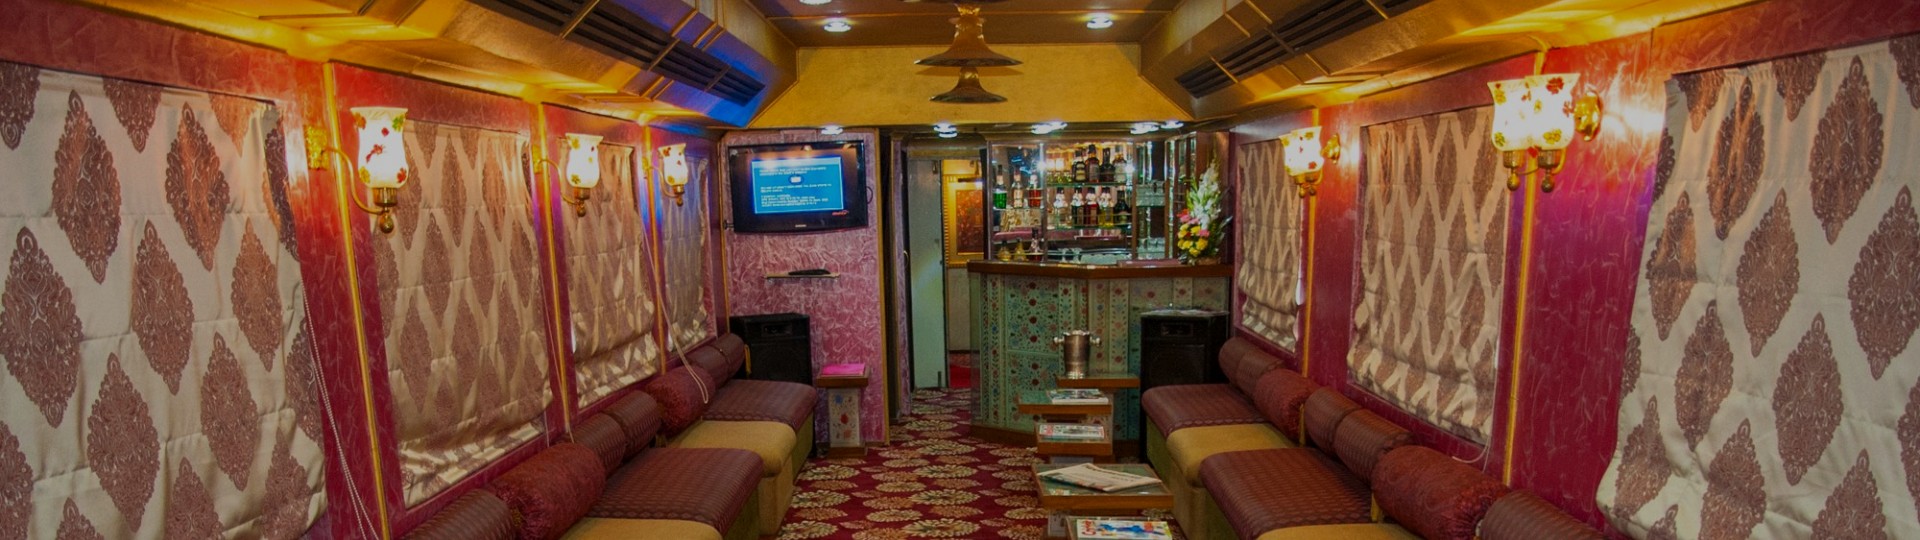 Palace On Wheels Train Tour Palace On Wheels Tour Packages